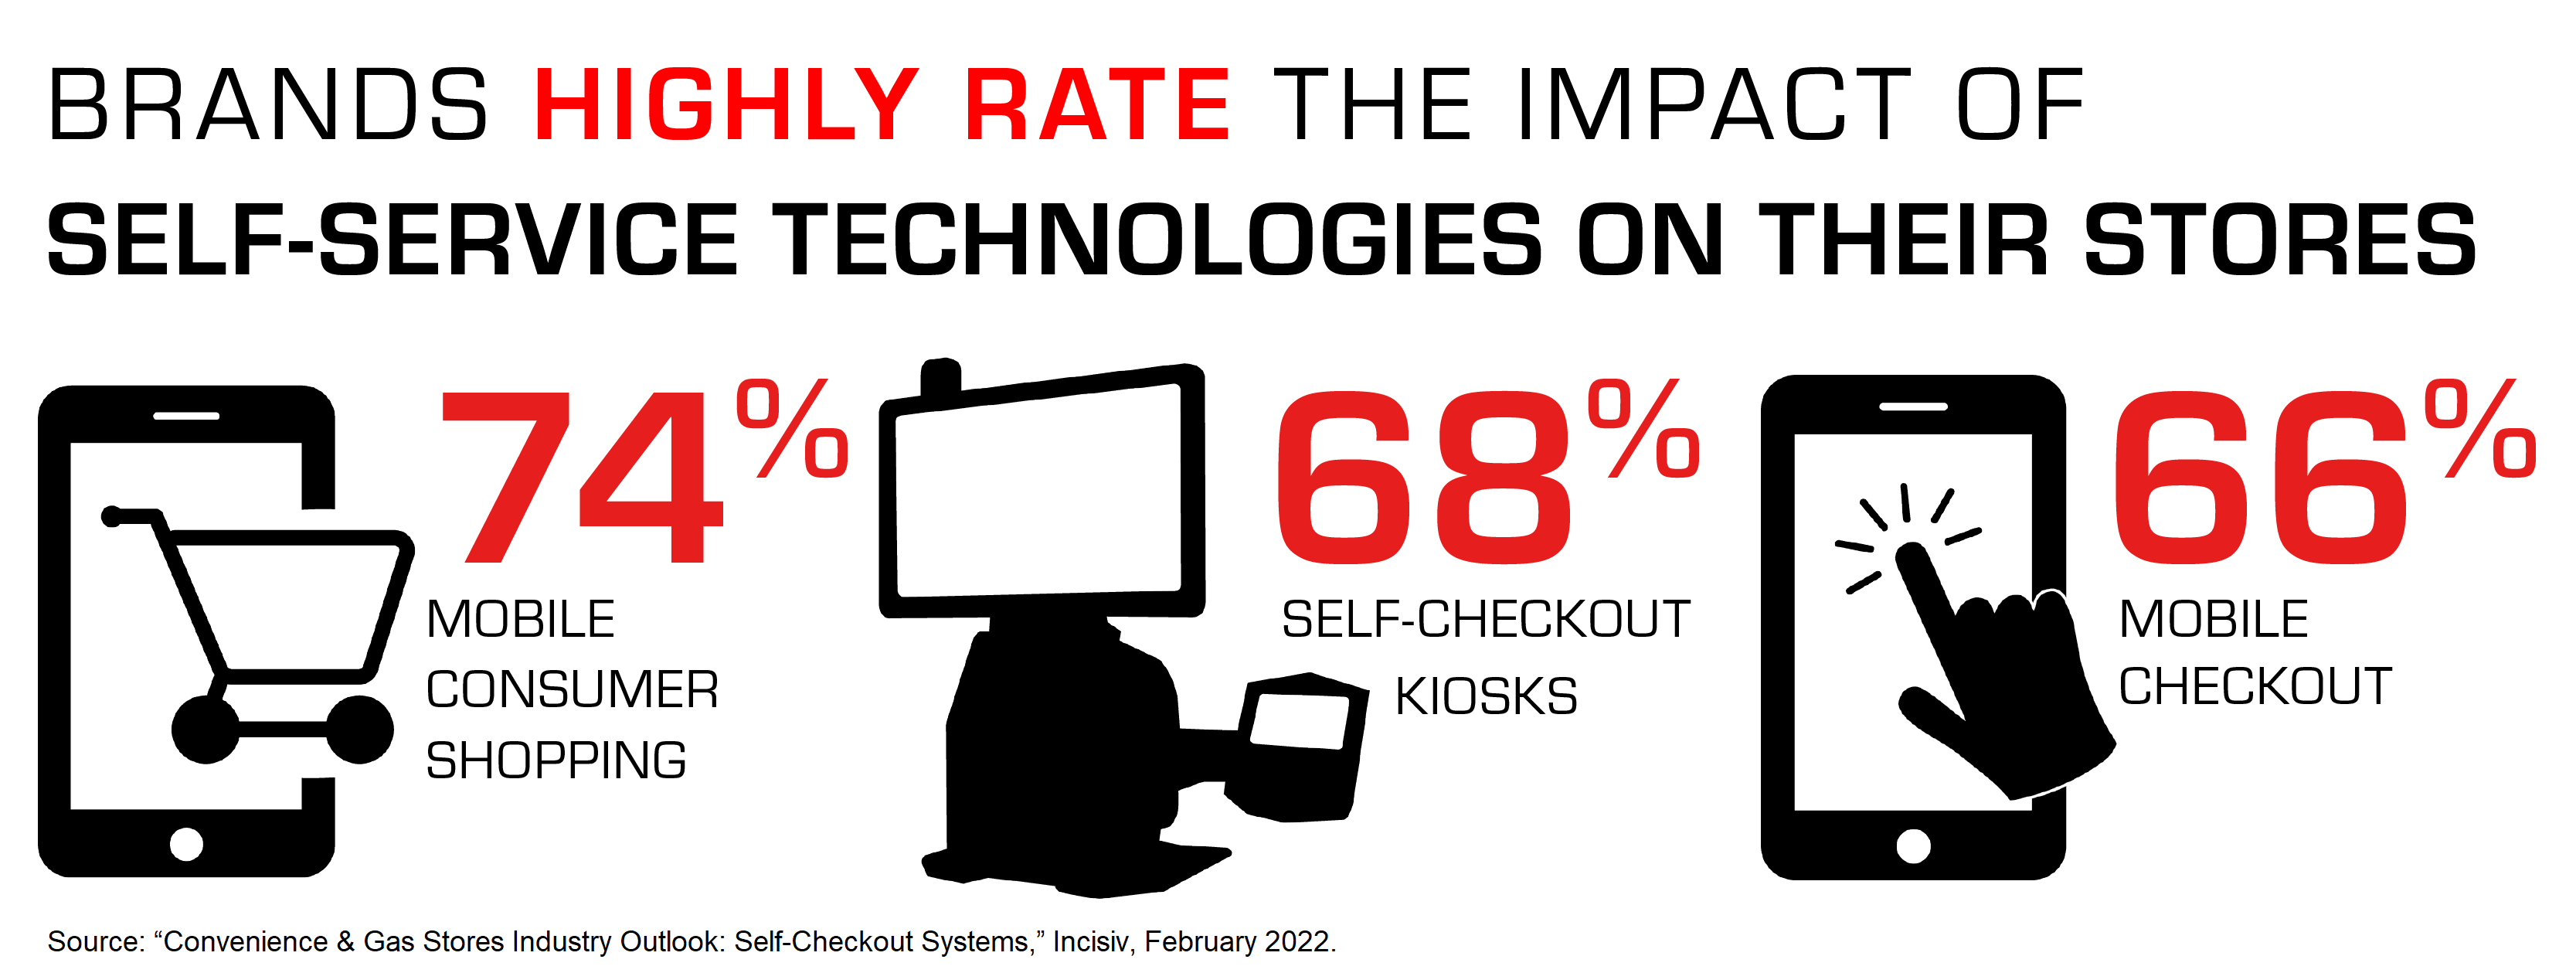 Brands highly rate the impact of self-service technologies on their stores